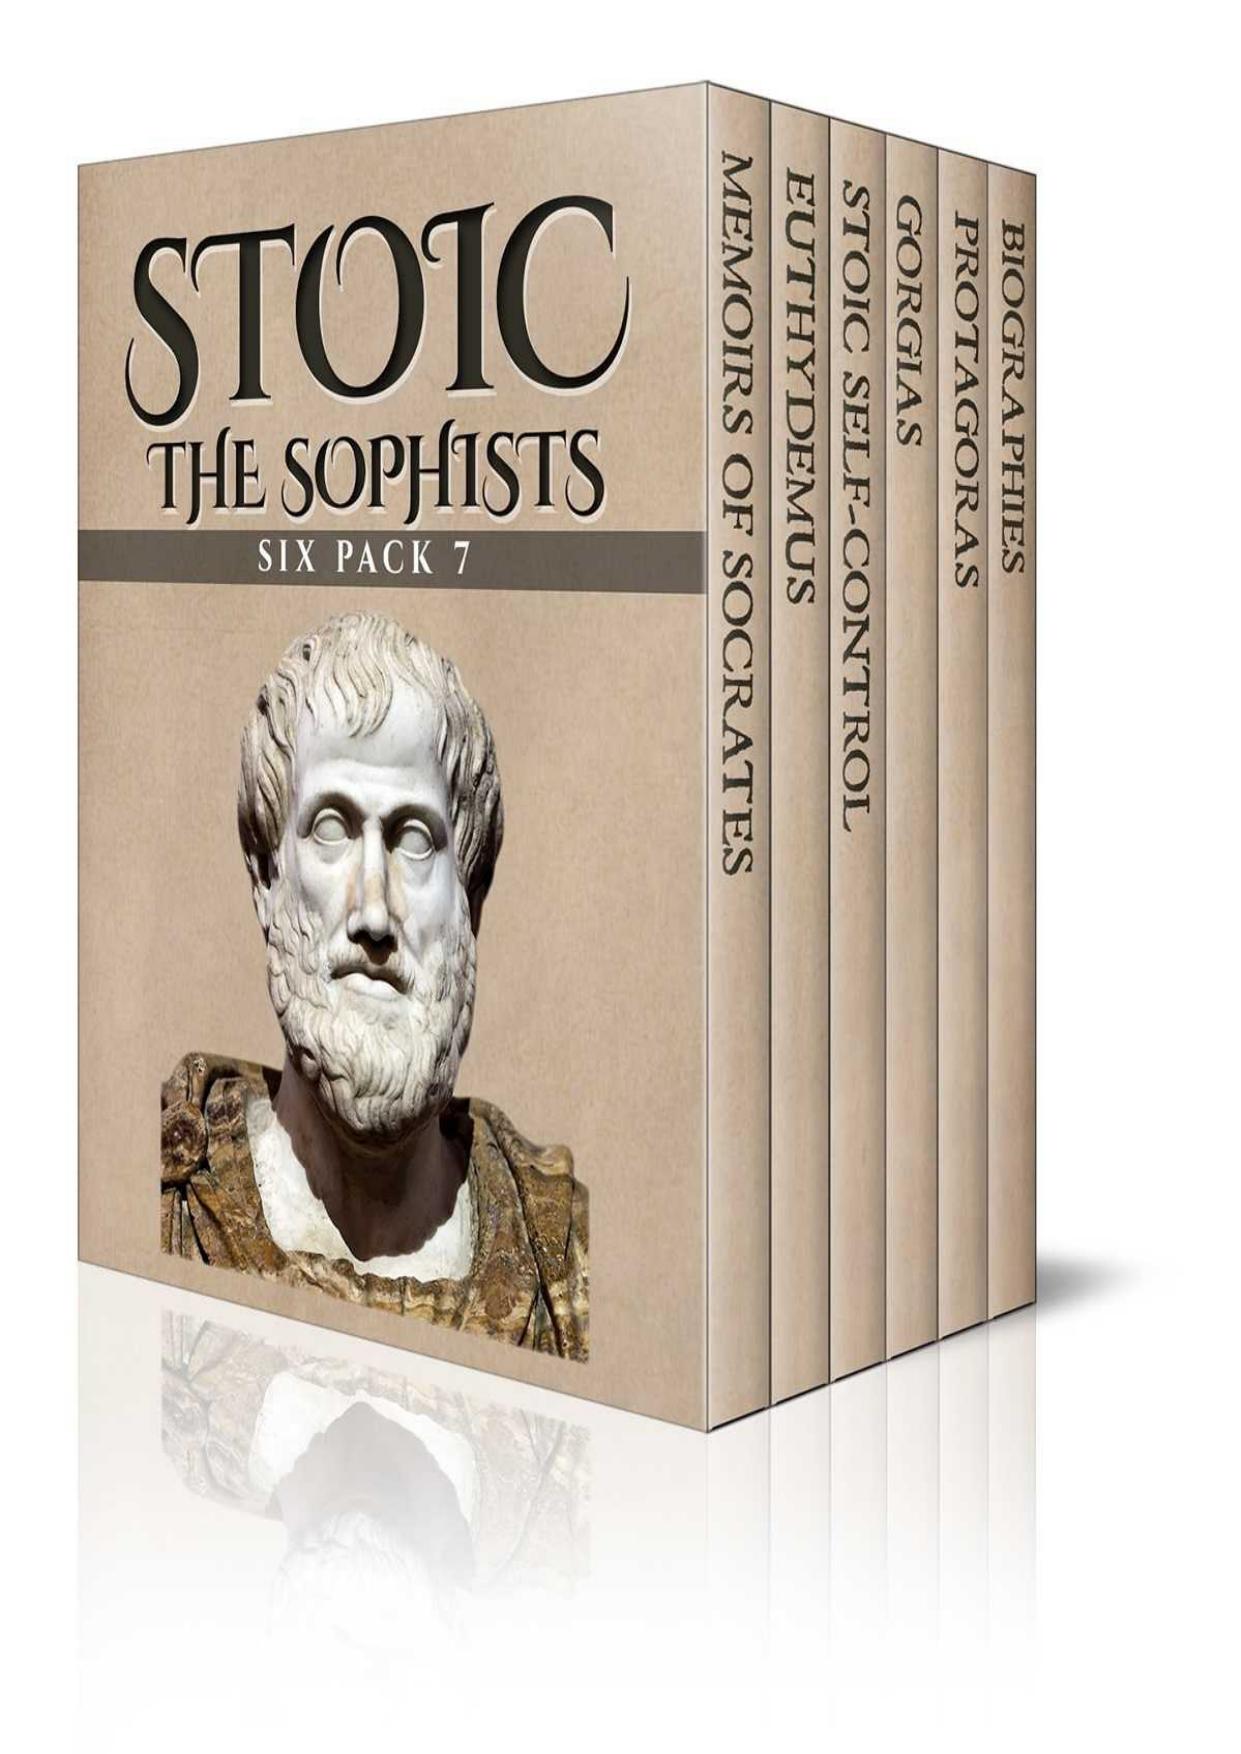 Stoic Six Pack 7: The Sophists